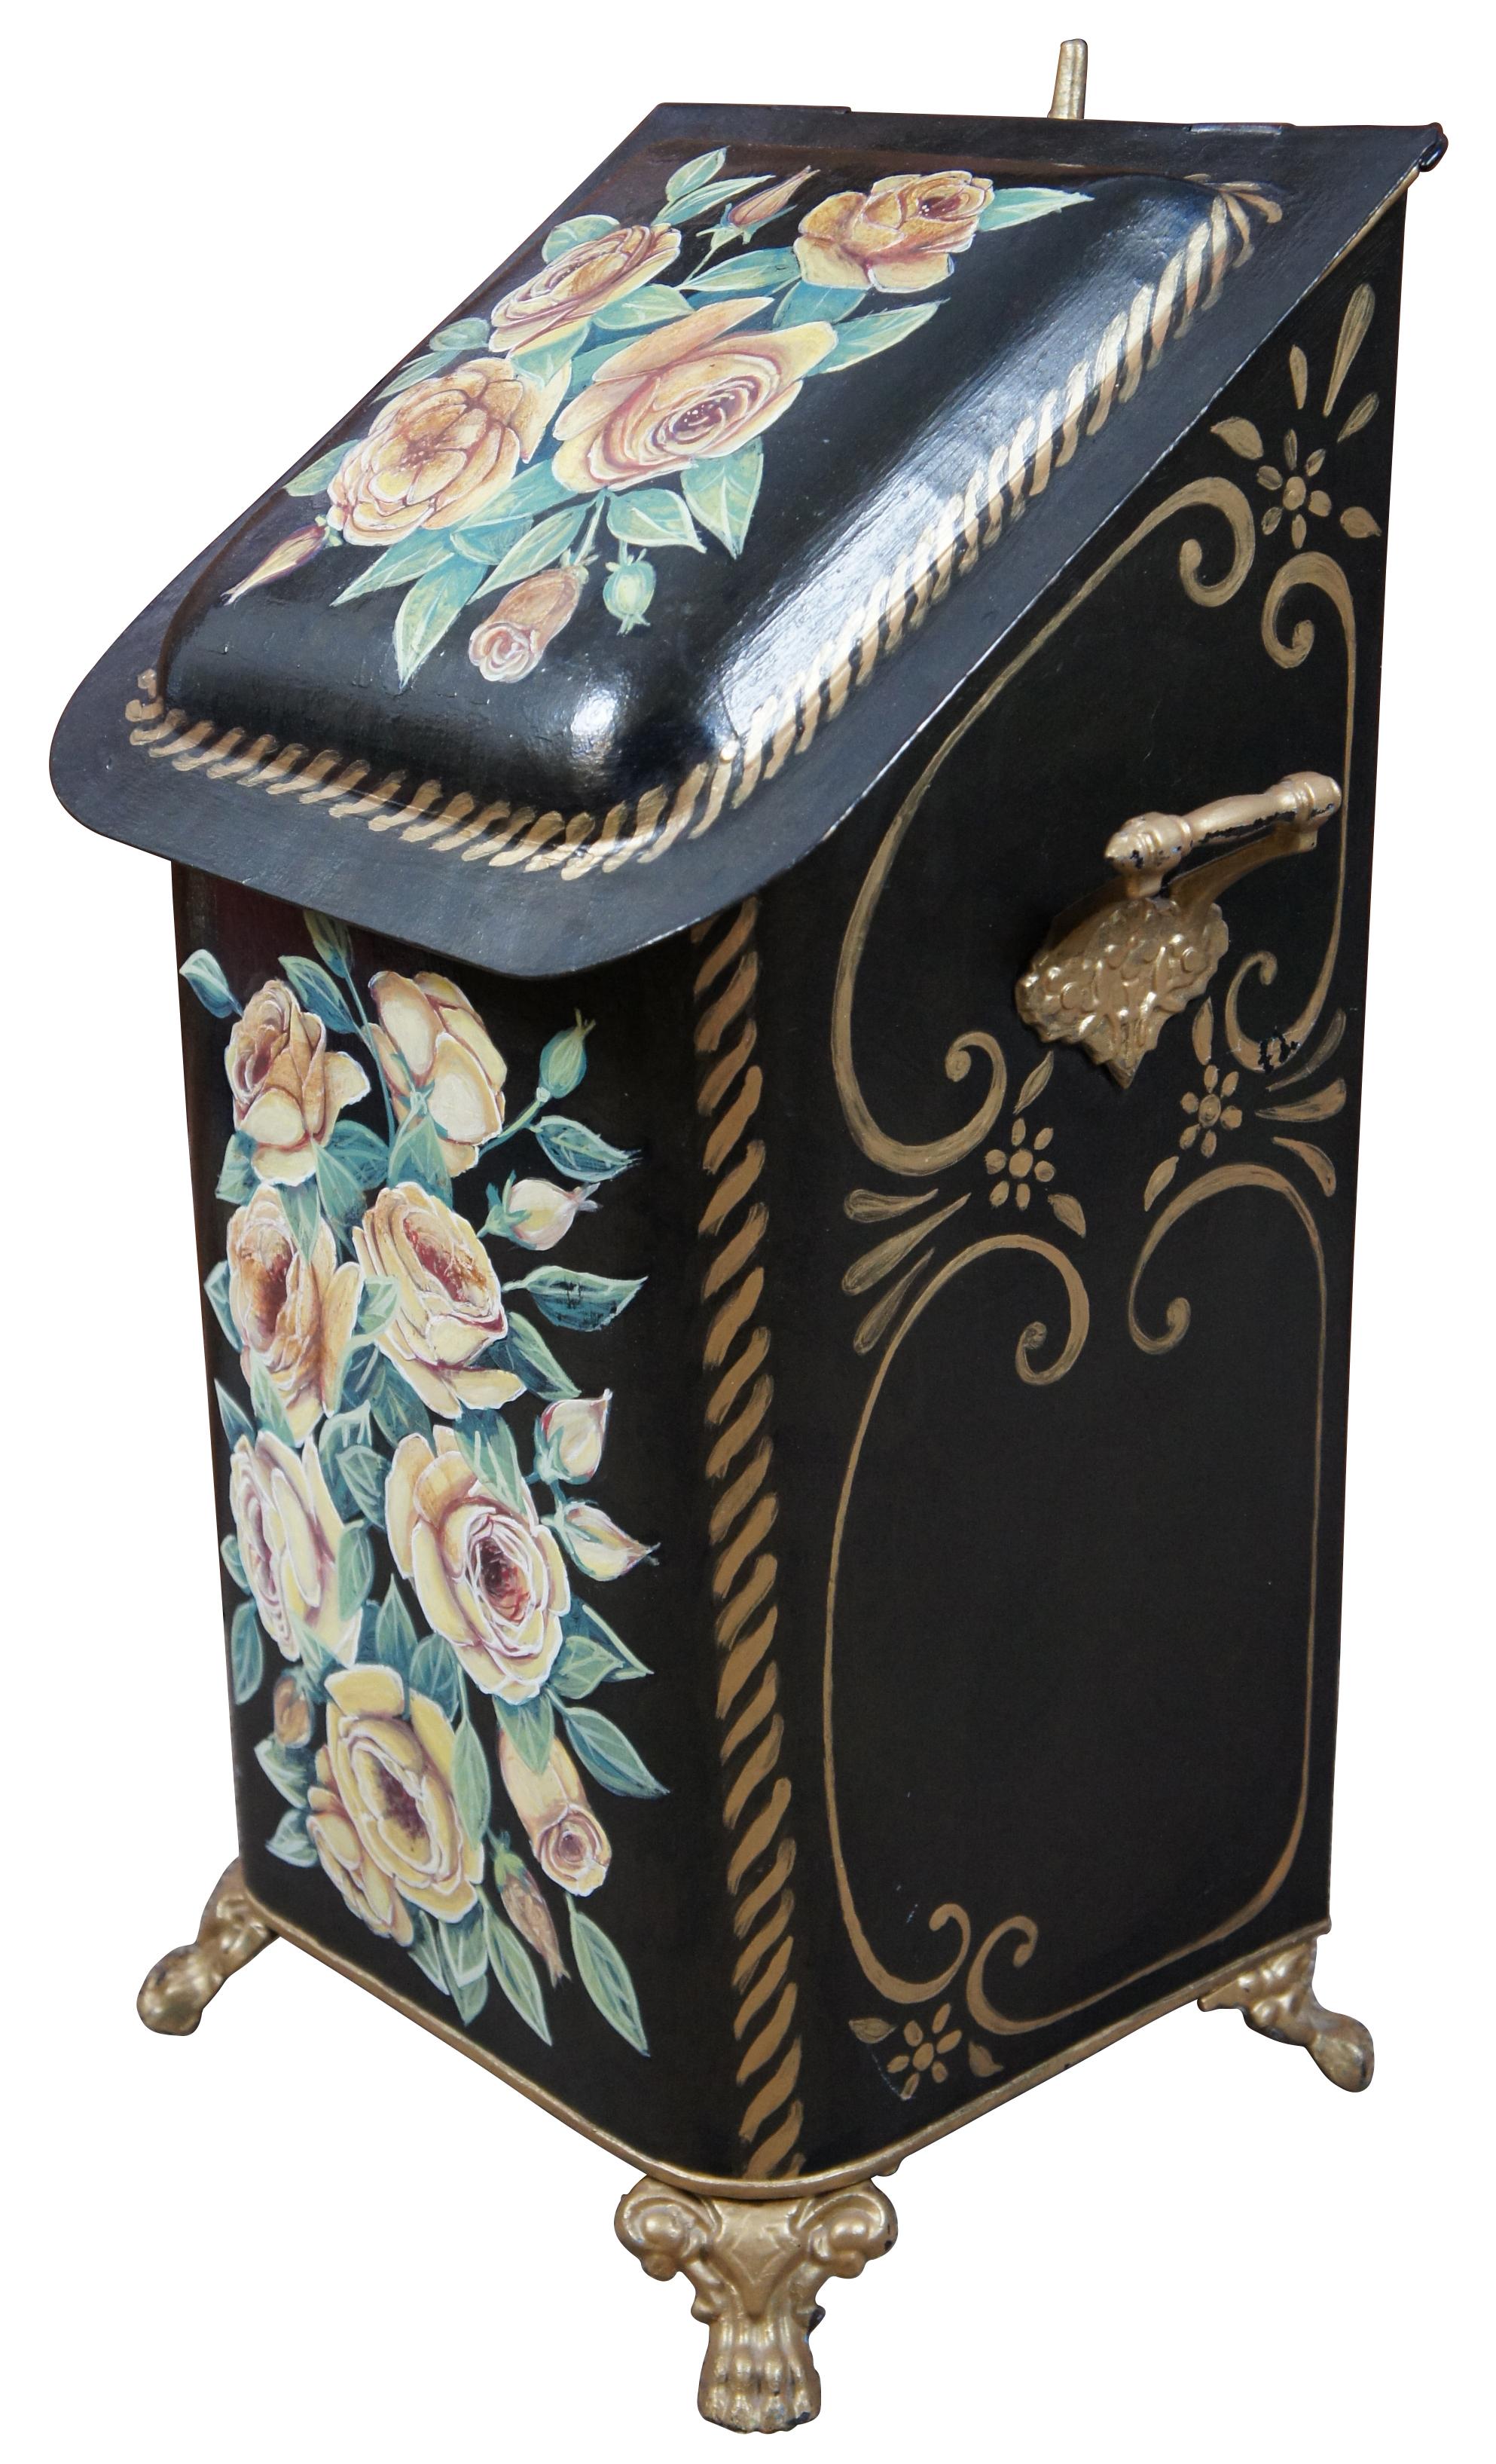 Antique Victorian toleware metal coal bin or heartherware hod with lid, painted floral motif in black with yellow and pink roses, accented with gilded feet, handles, and rear hook for a shovel.
 